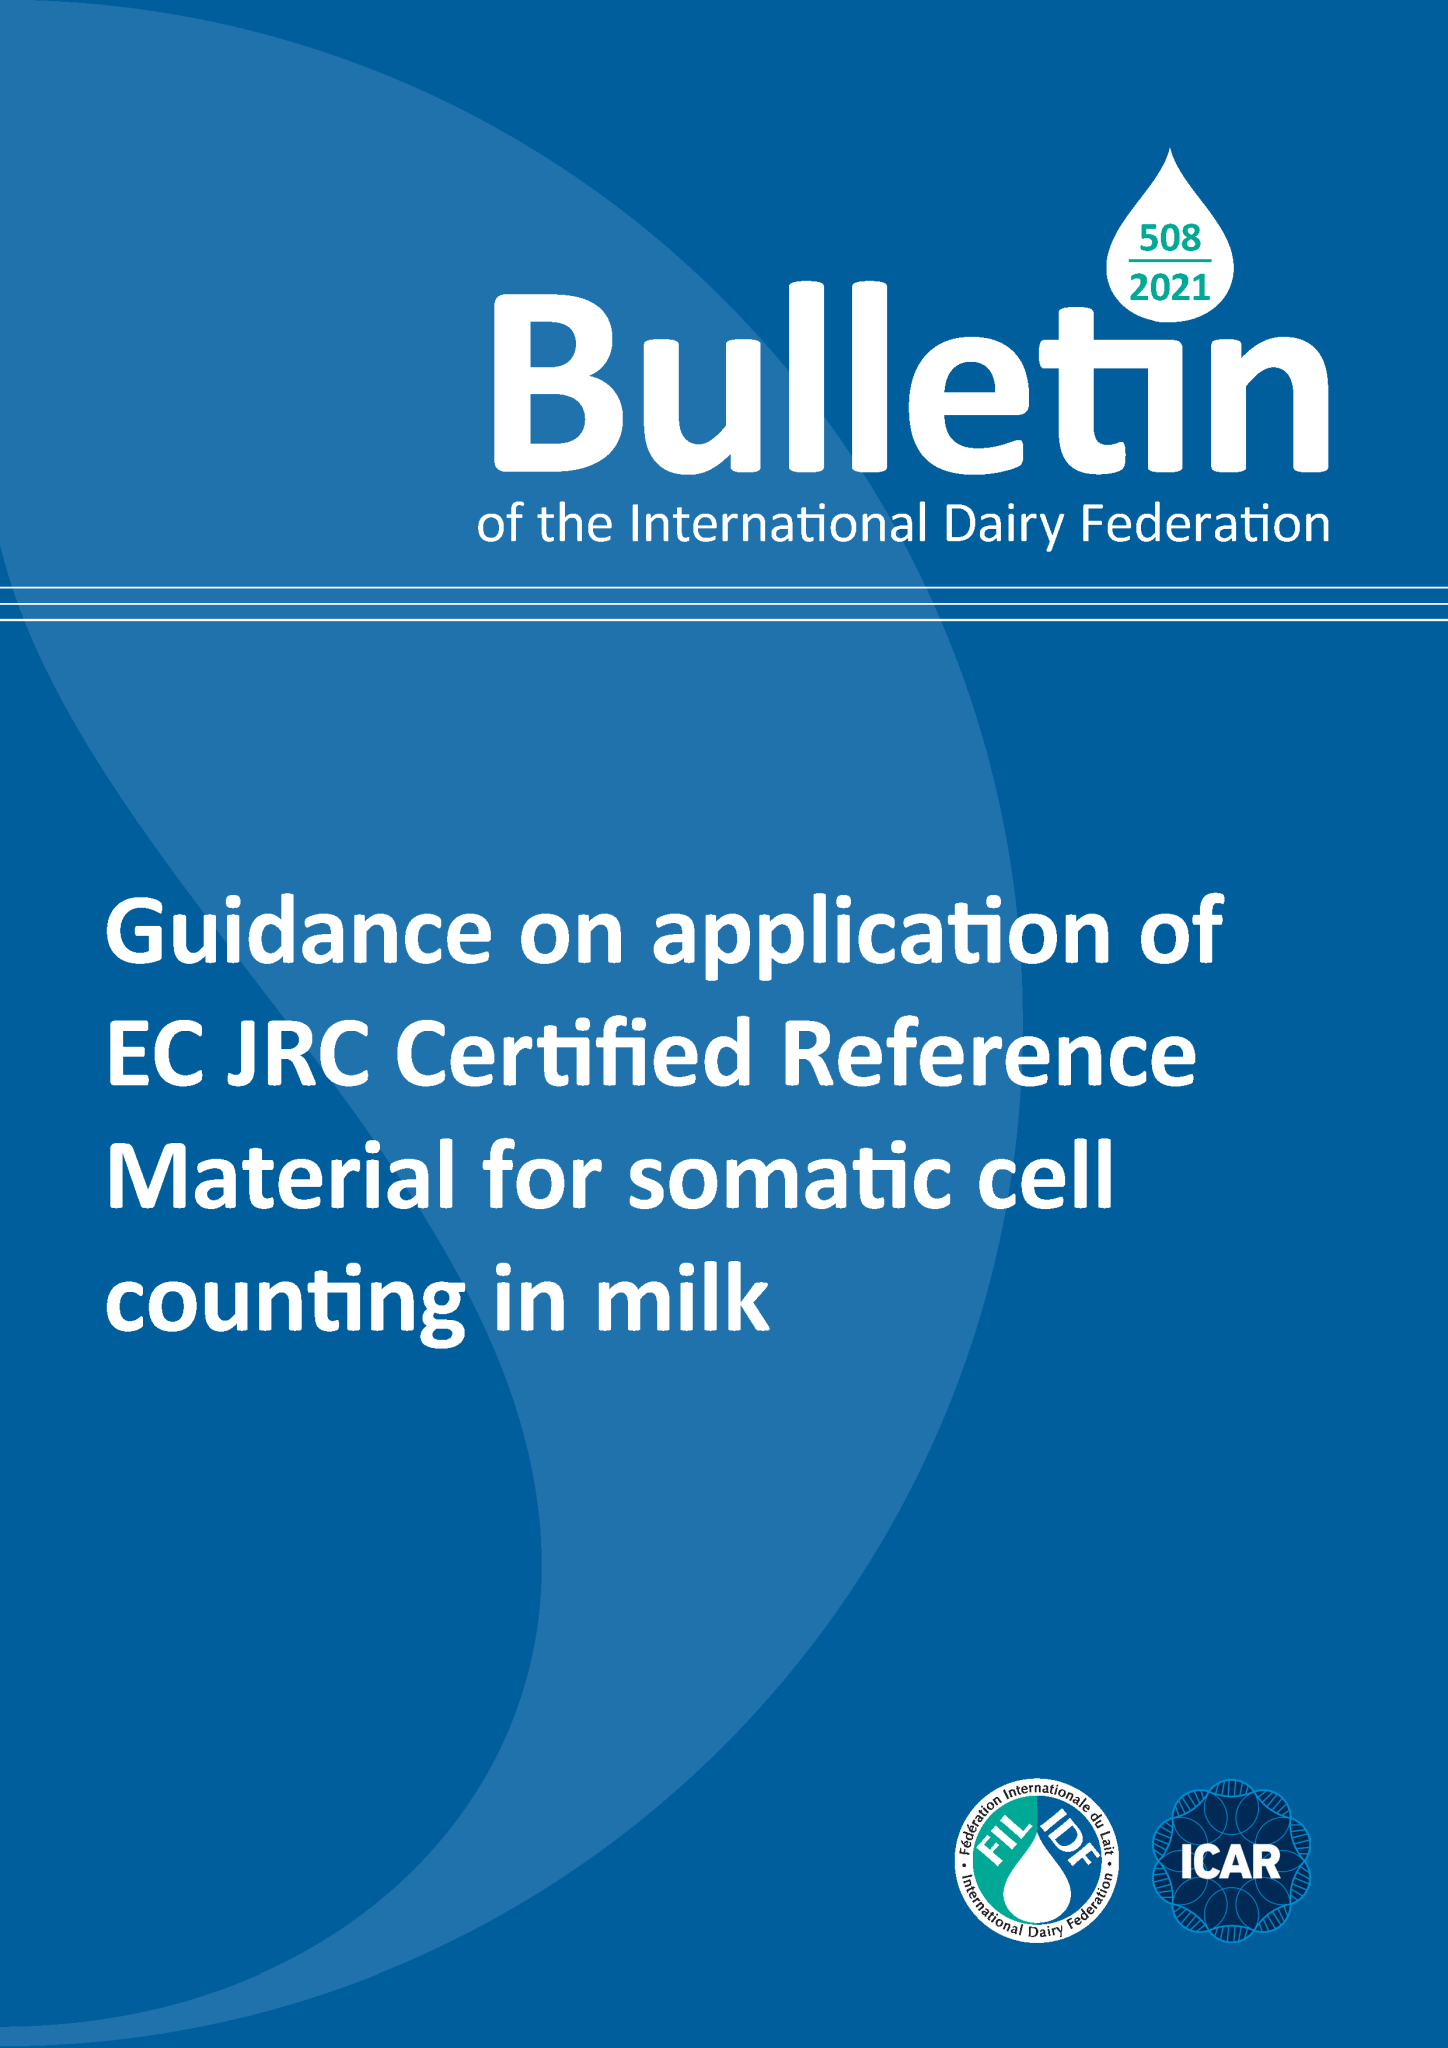 Bulletin of the IDF N° 508/2021: Guidance on application of EC JRC Certified Reference Material for somatic cell counting in milk - FIL-IDF